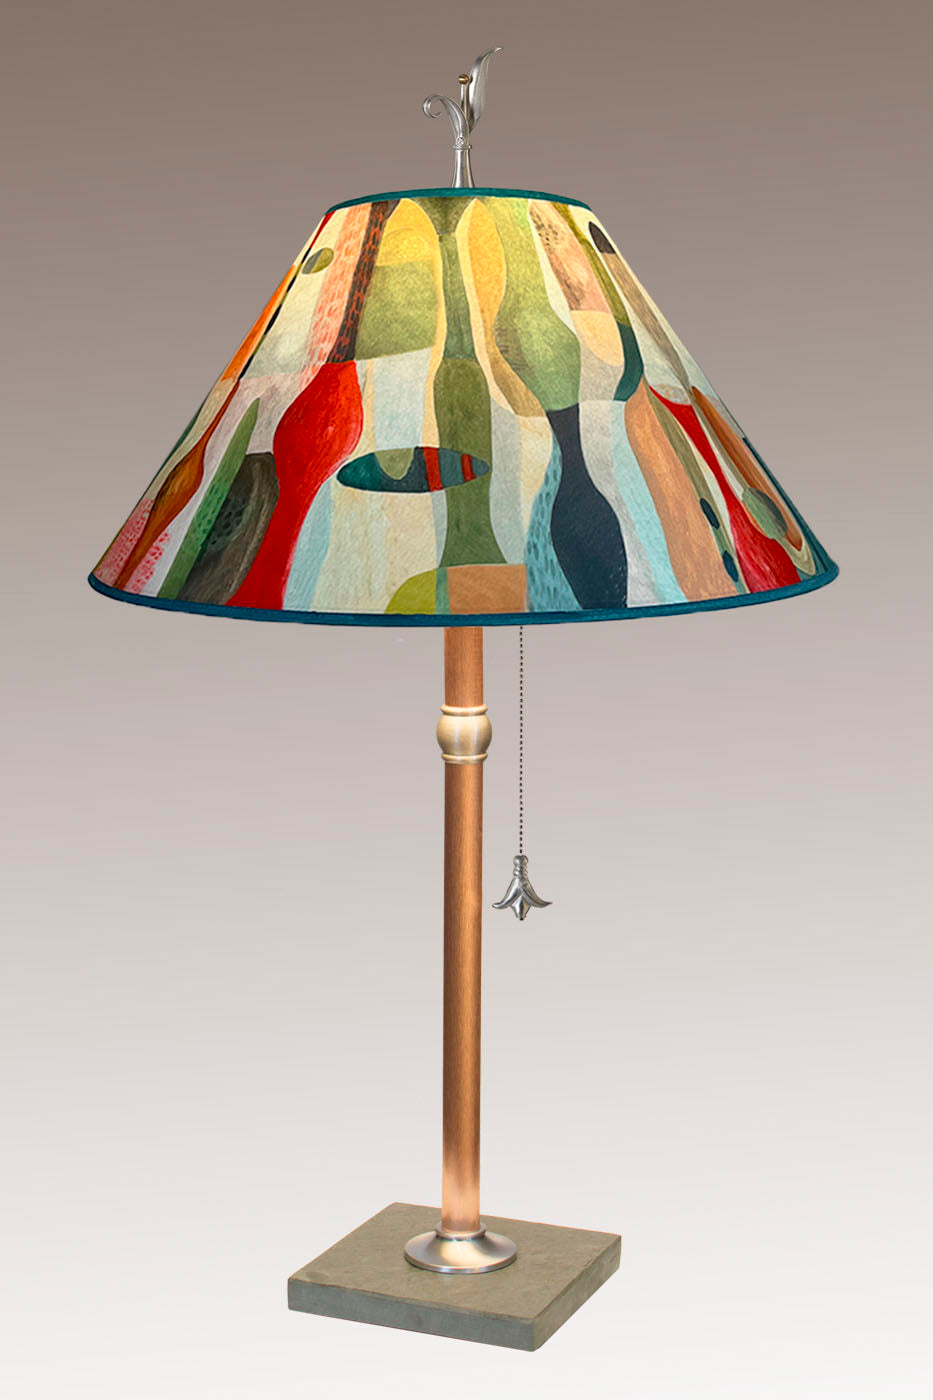 Janna Ugone & Co Table Lamp Copper Table Lamp with Large Conical Shade in Riviera in Poppy